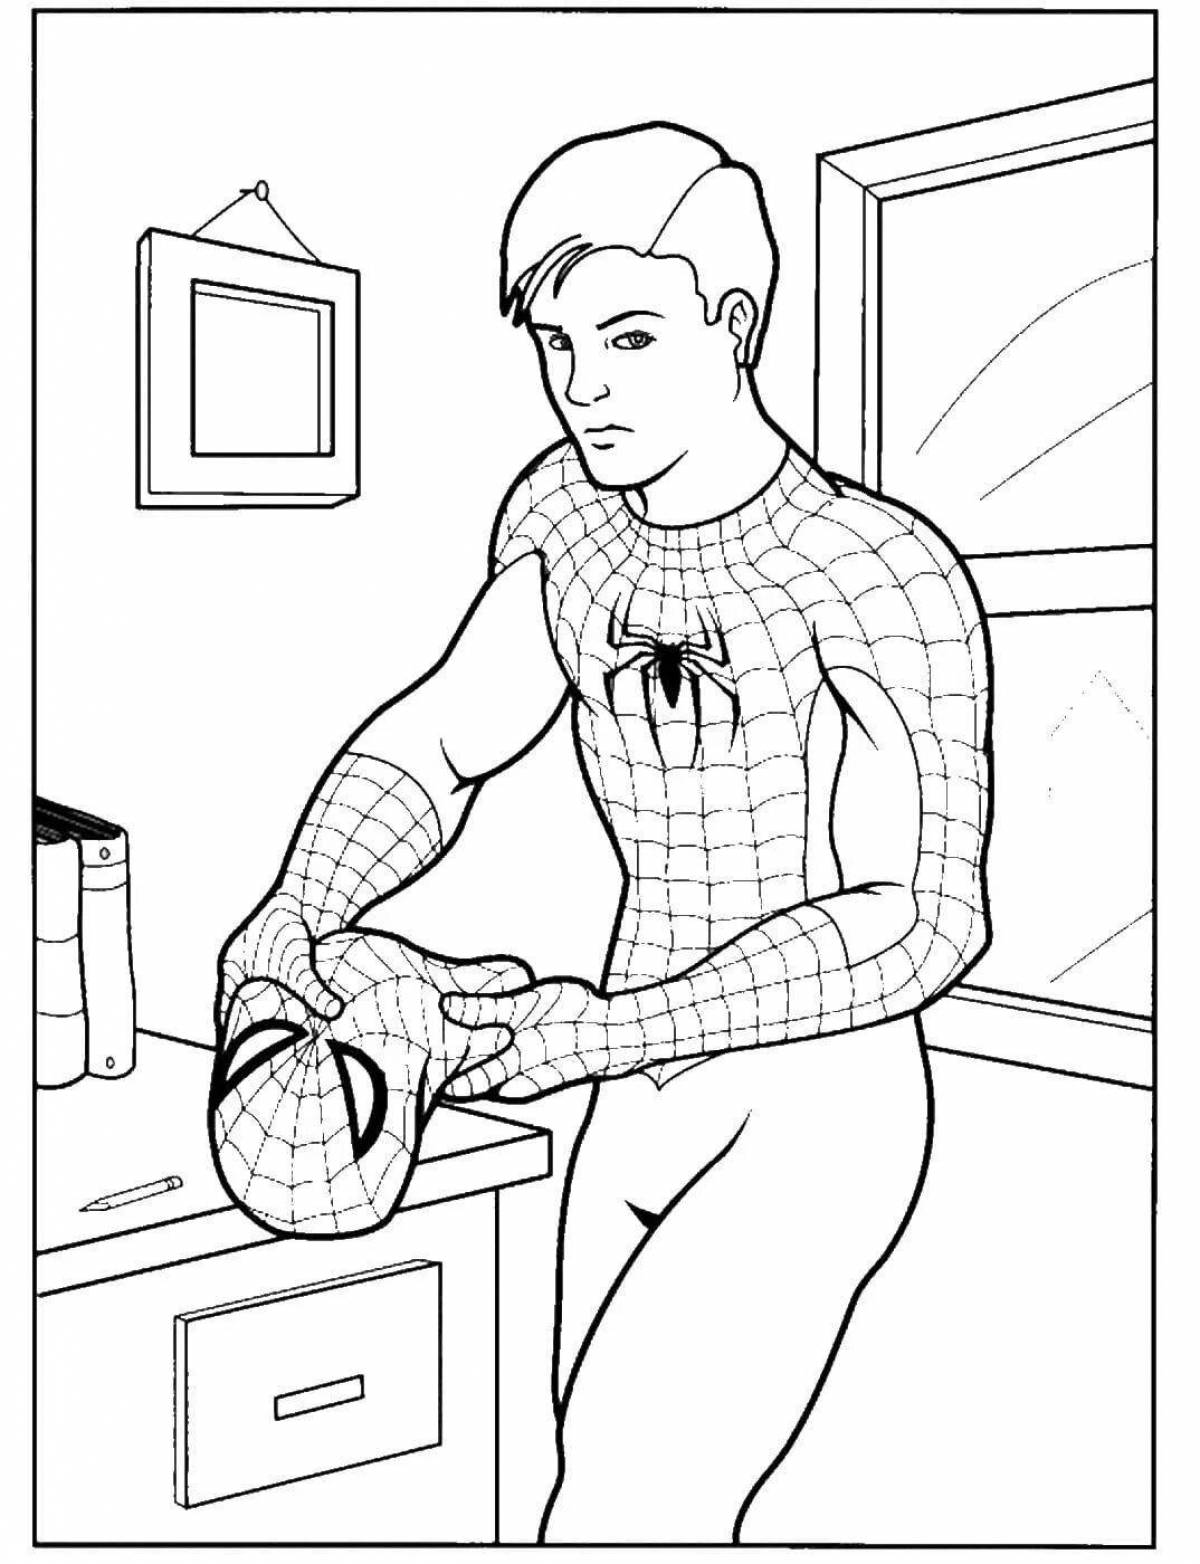 Spiderman's funny coloring book